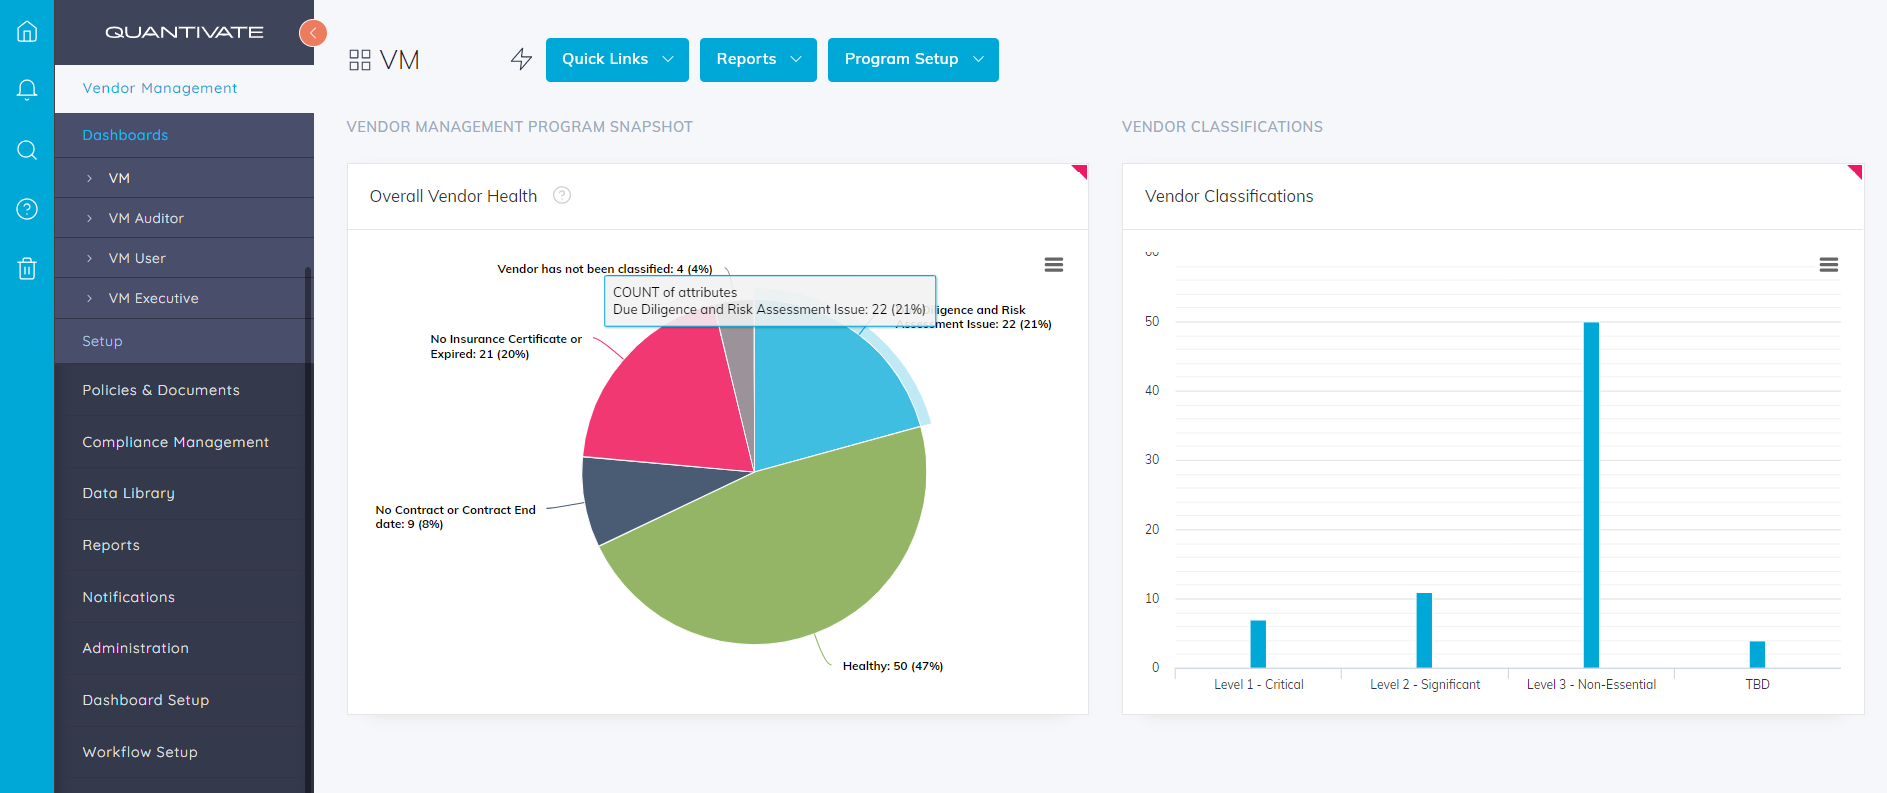 Vendor Management Dashboard - Every Quantivate application features a customizable dashboard to visualize the data you care most about.